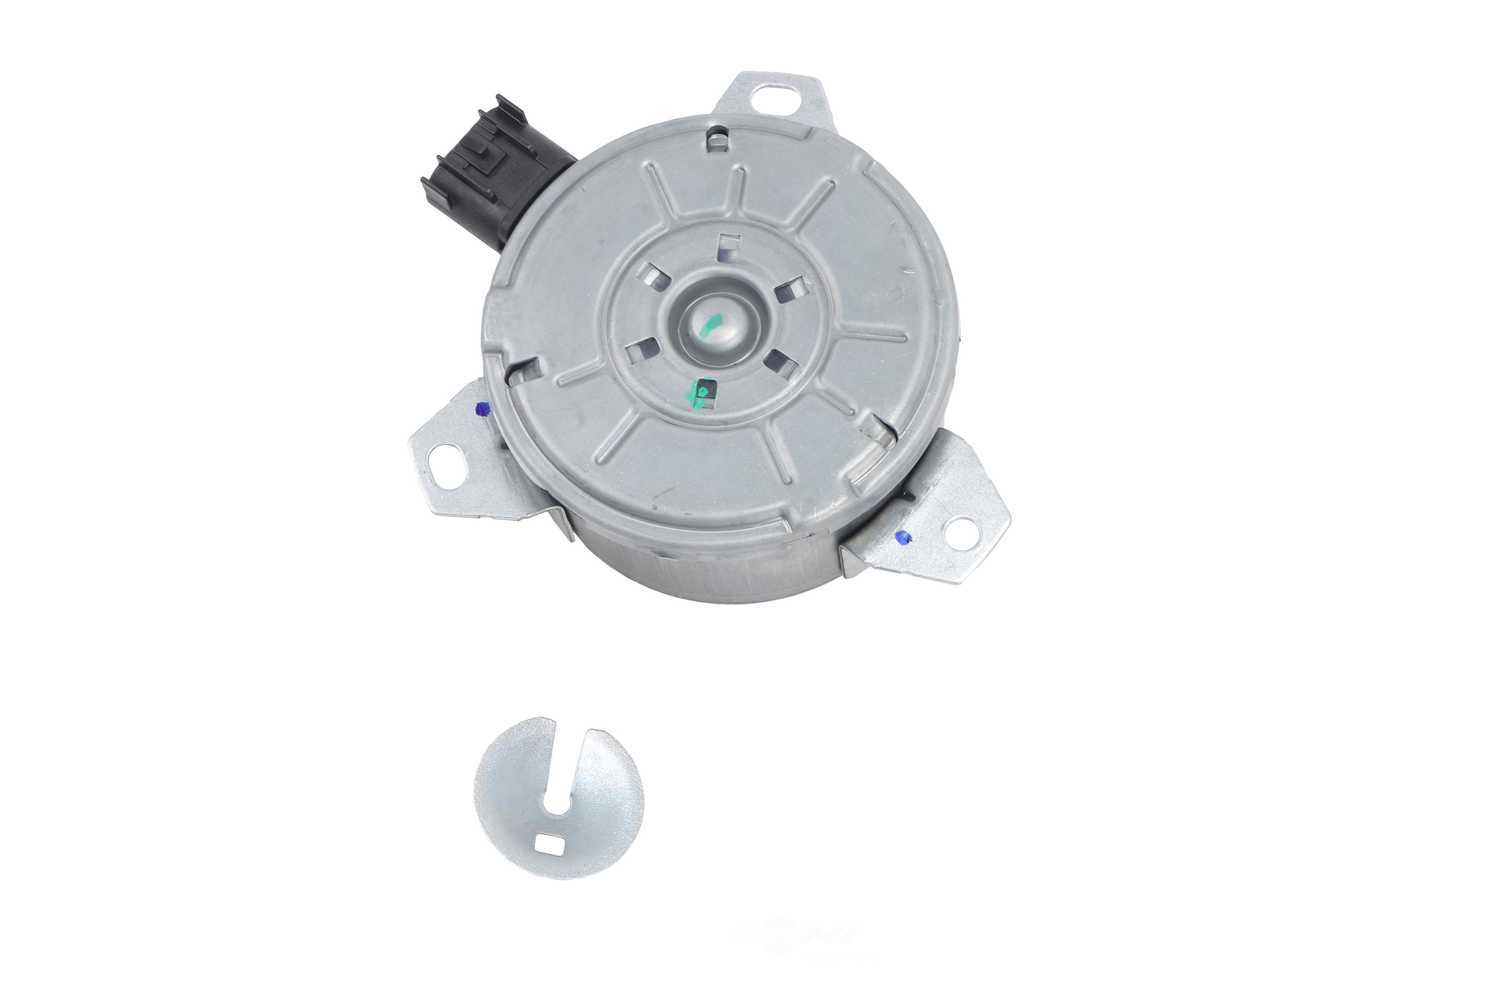 GM GENUINE PARTS CANADA - Engine Cooling Fan Motor Kit - GMC 15-80551